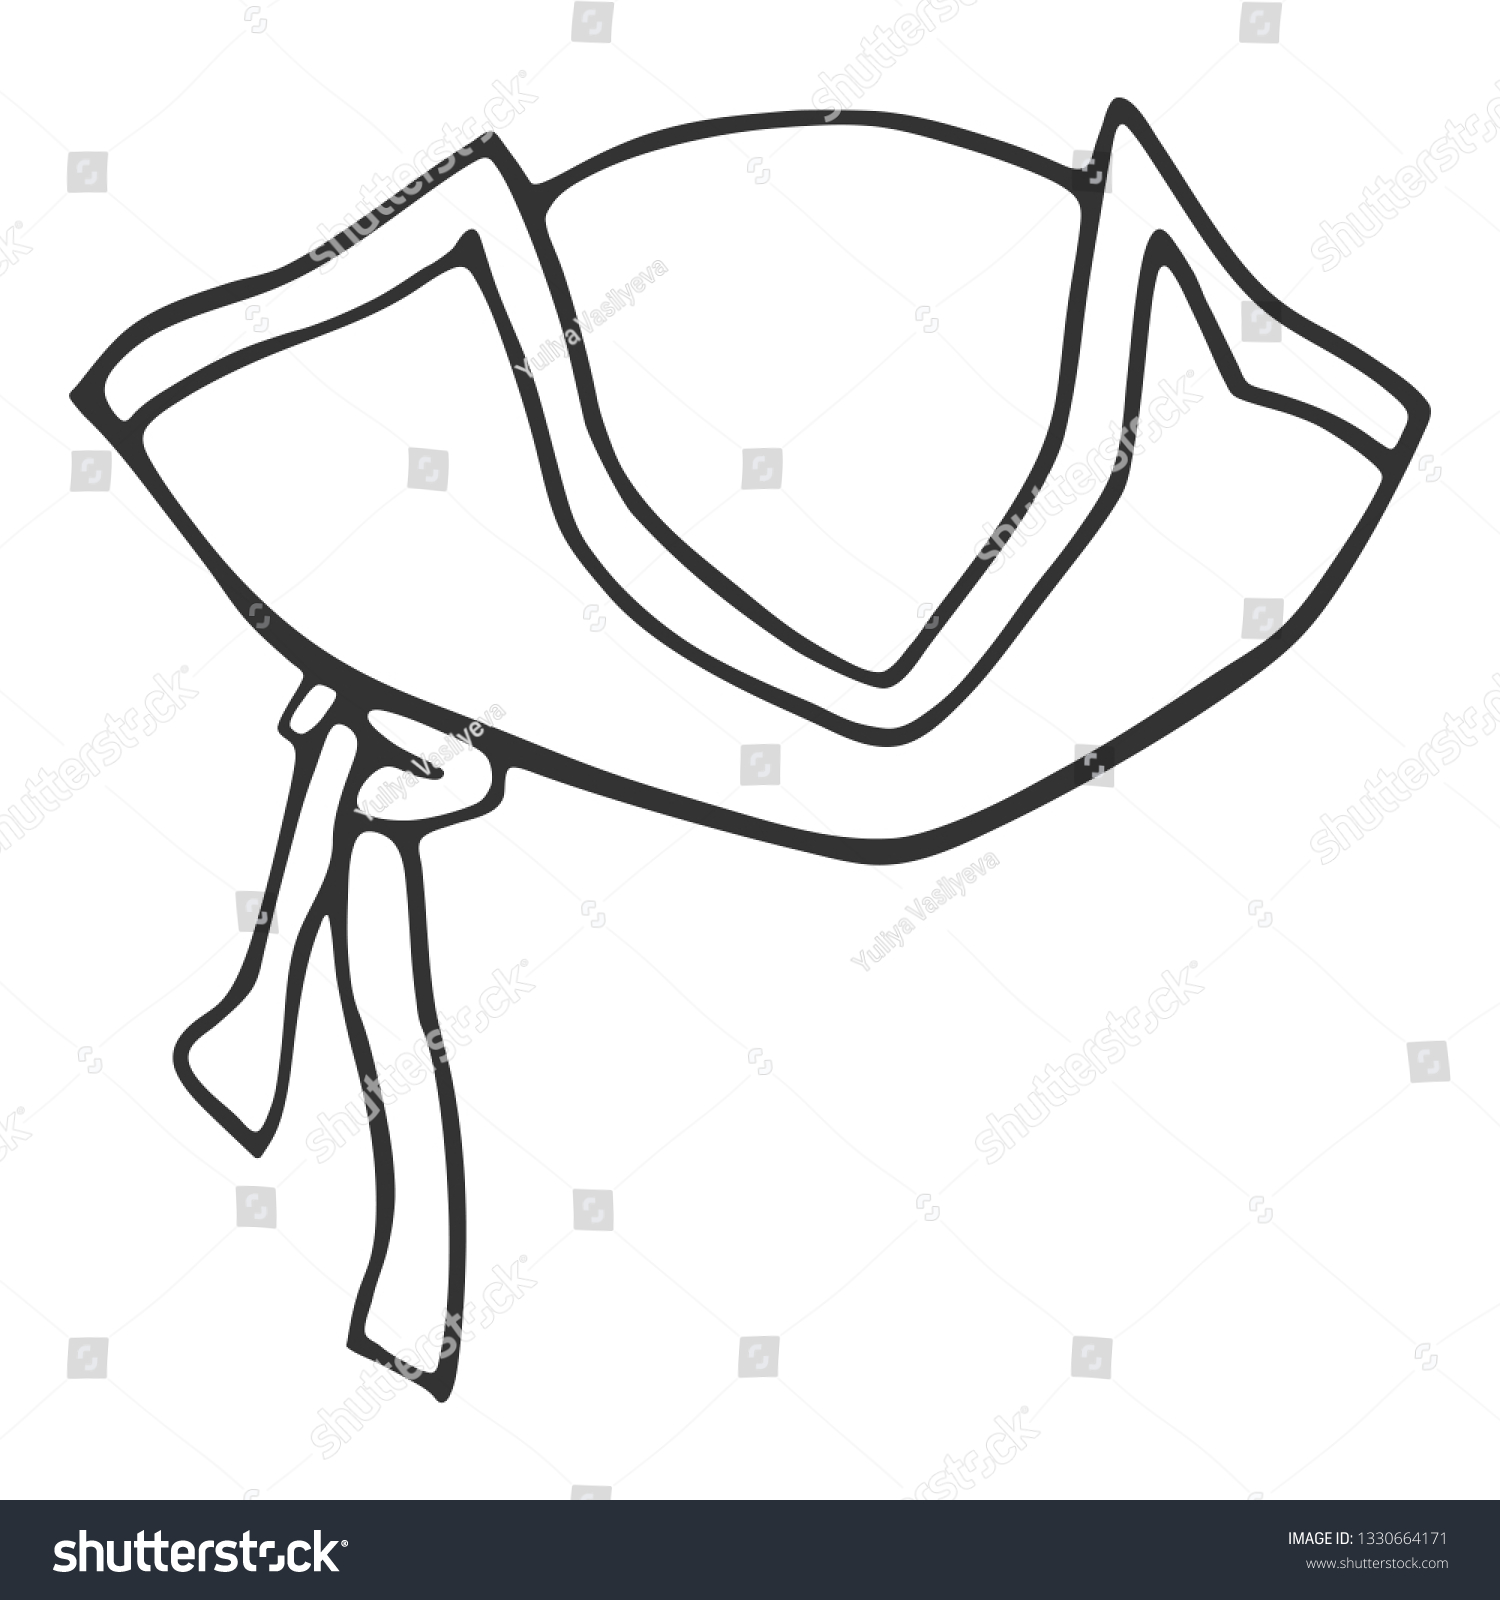 Linear sketch pirate hat vector illustration stock vector royalty free